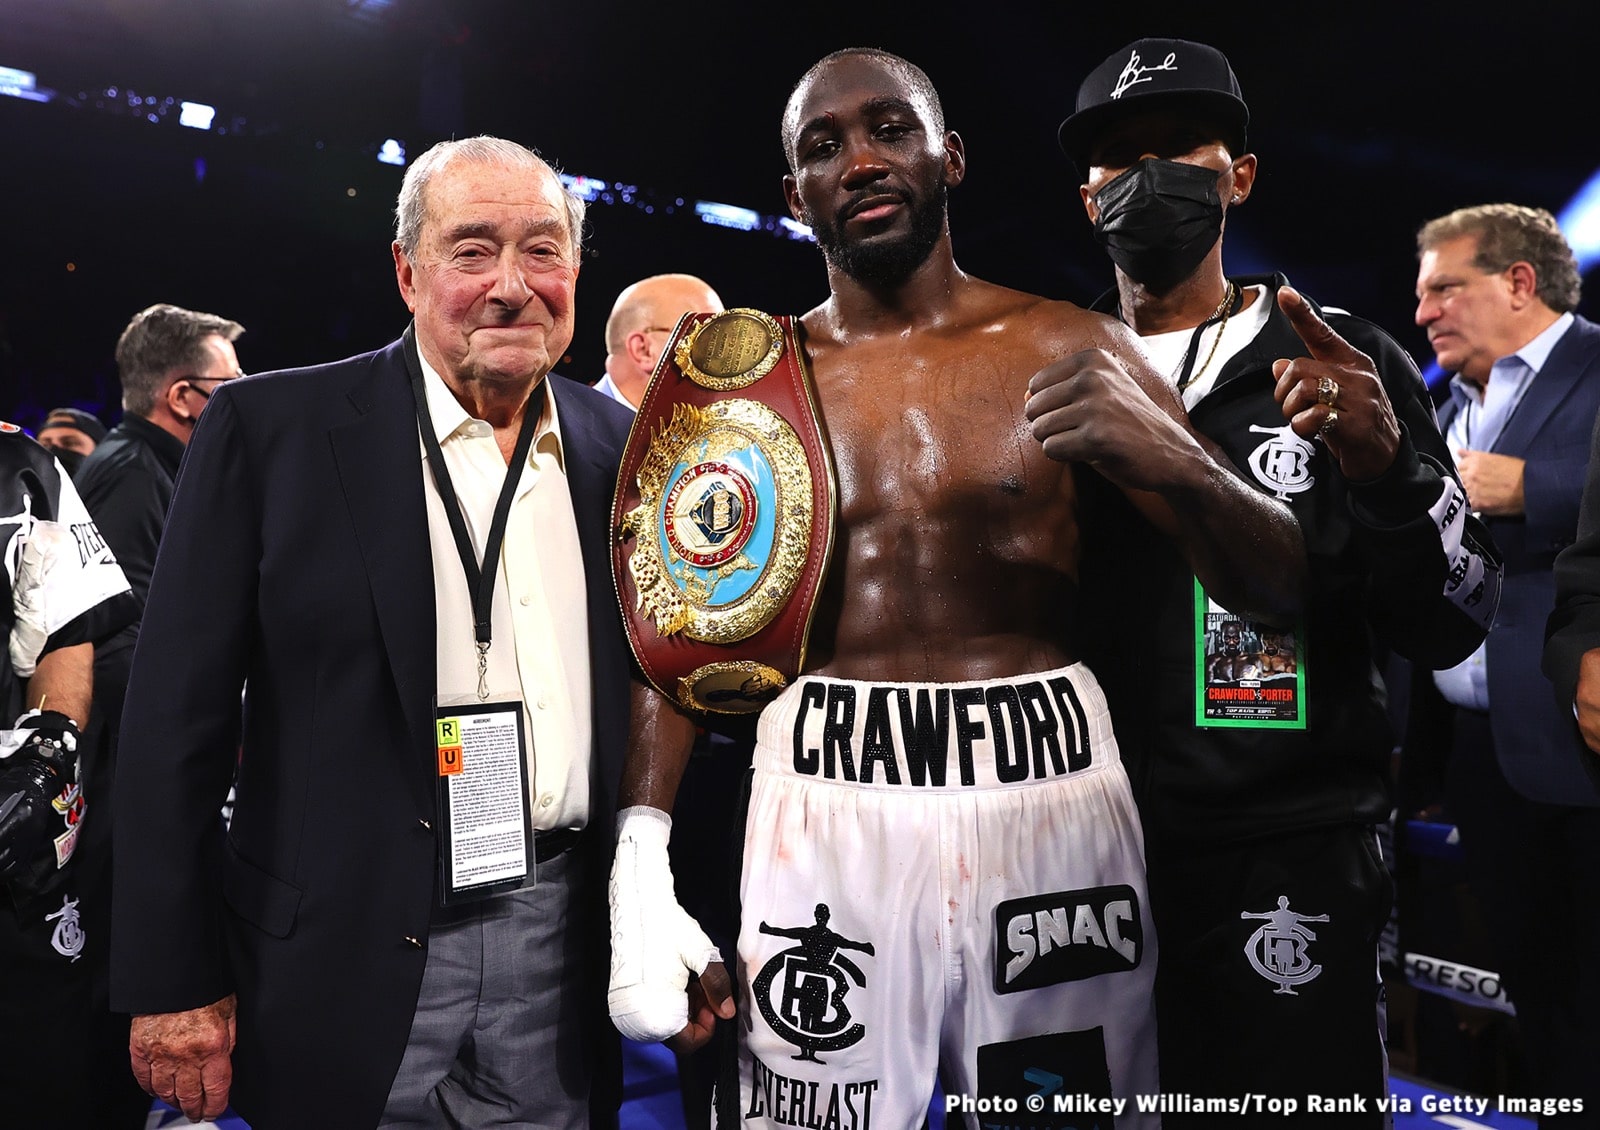 Errol Spence, Jermell Charlo, Terence Crawford boxing image / photo